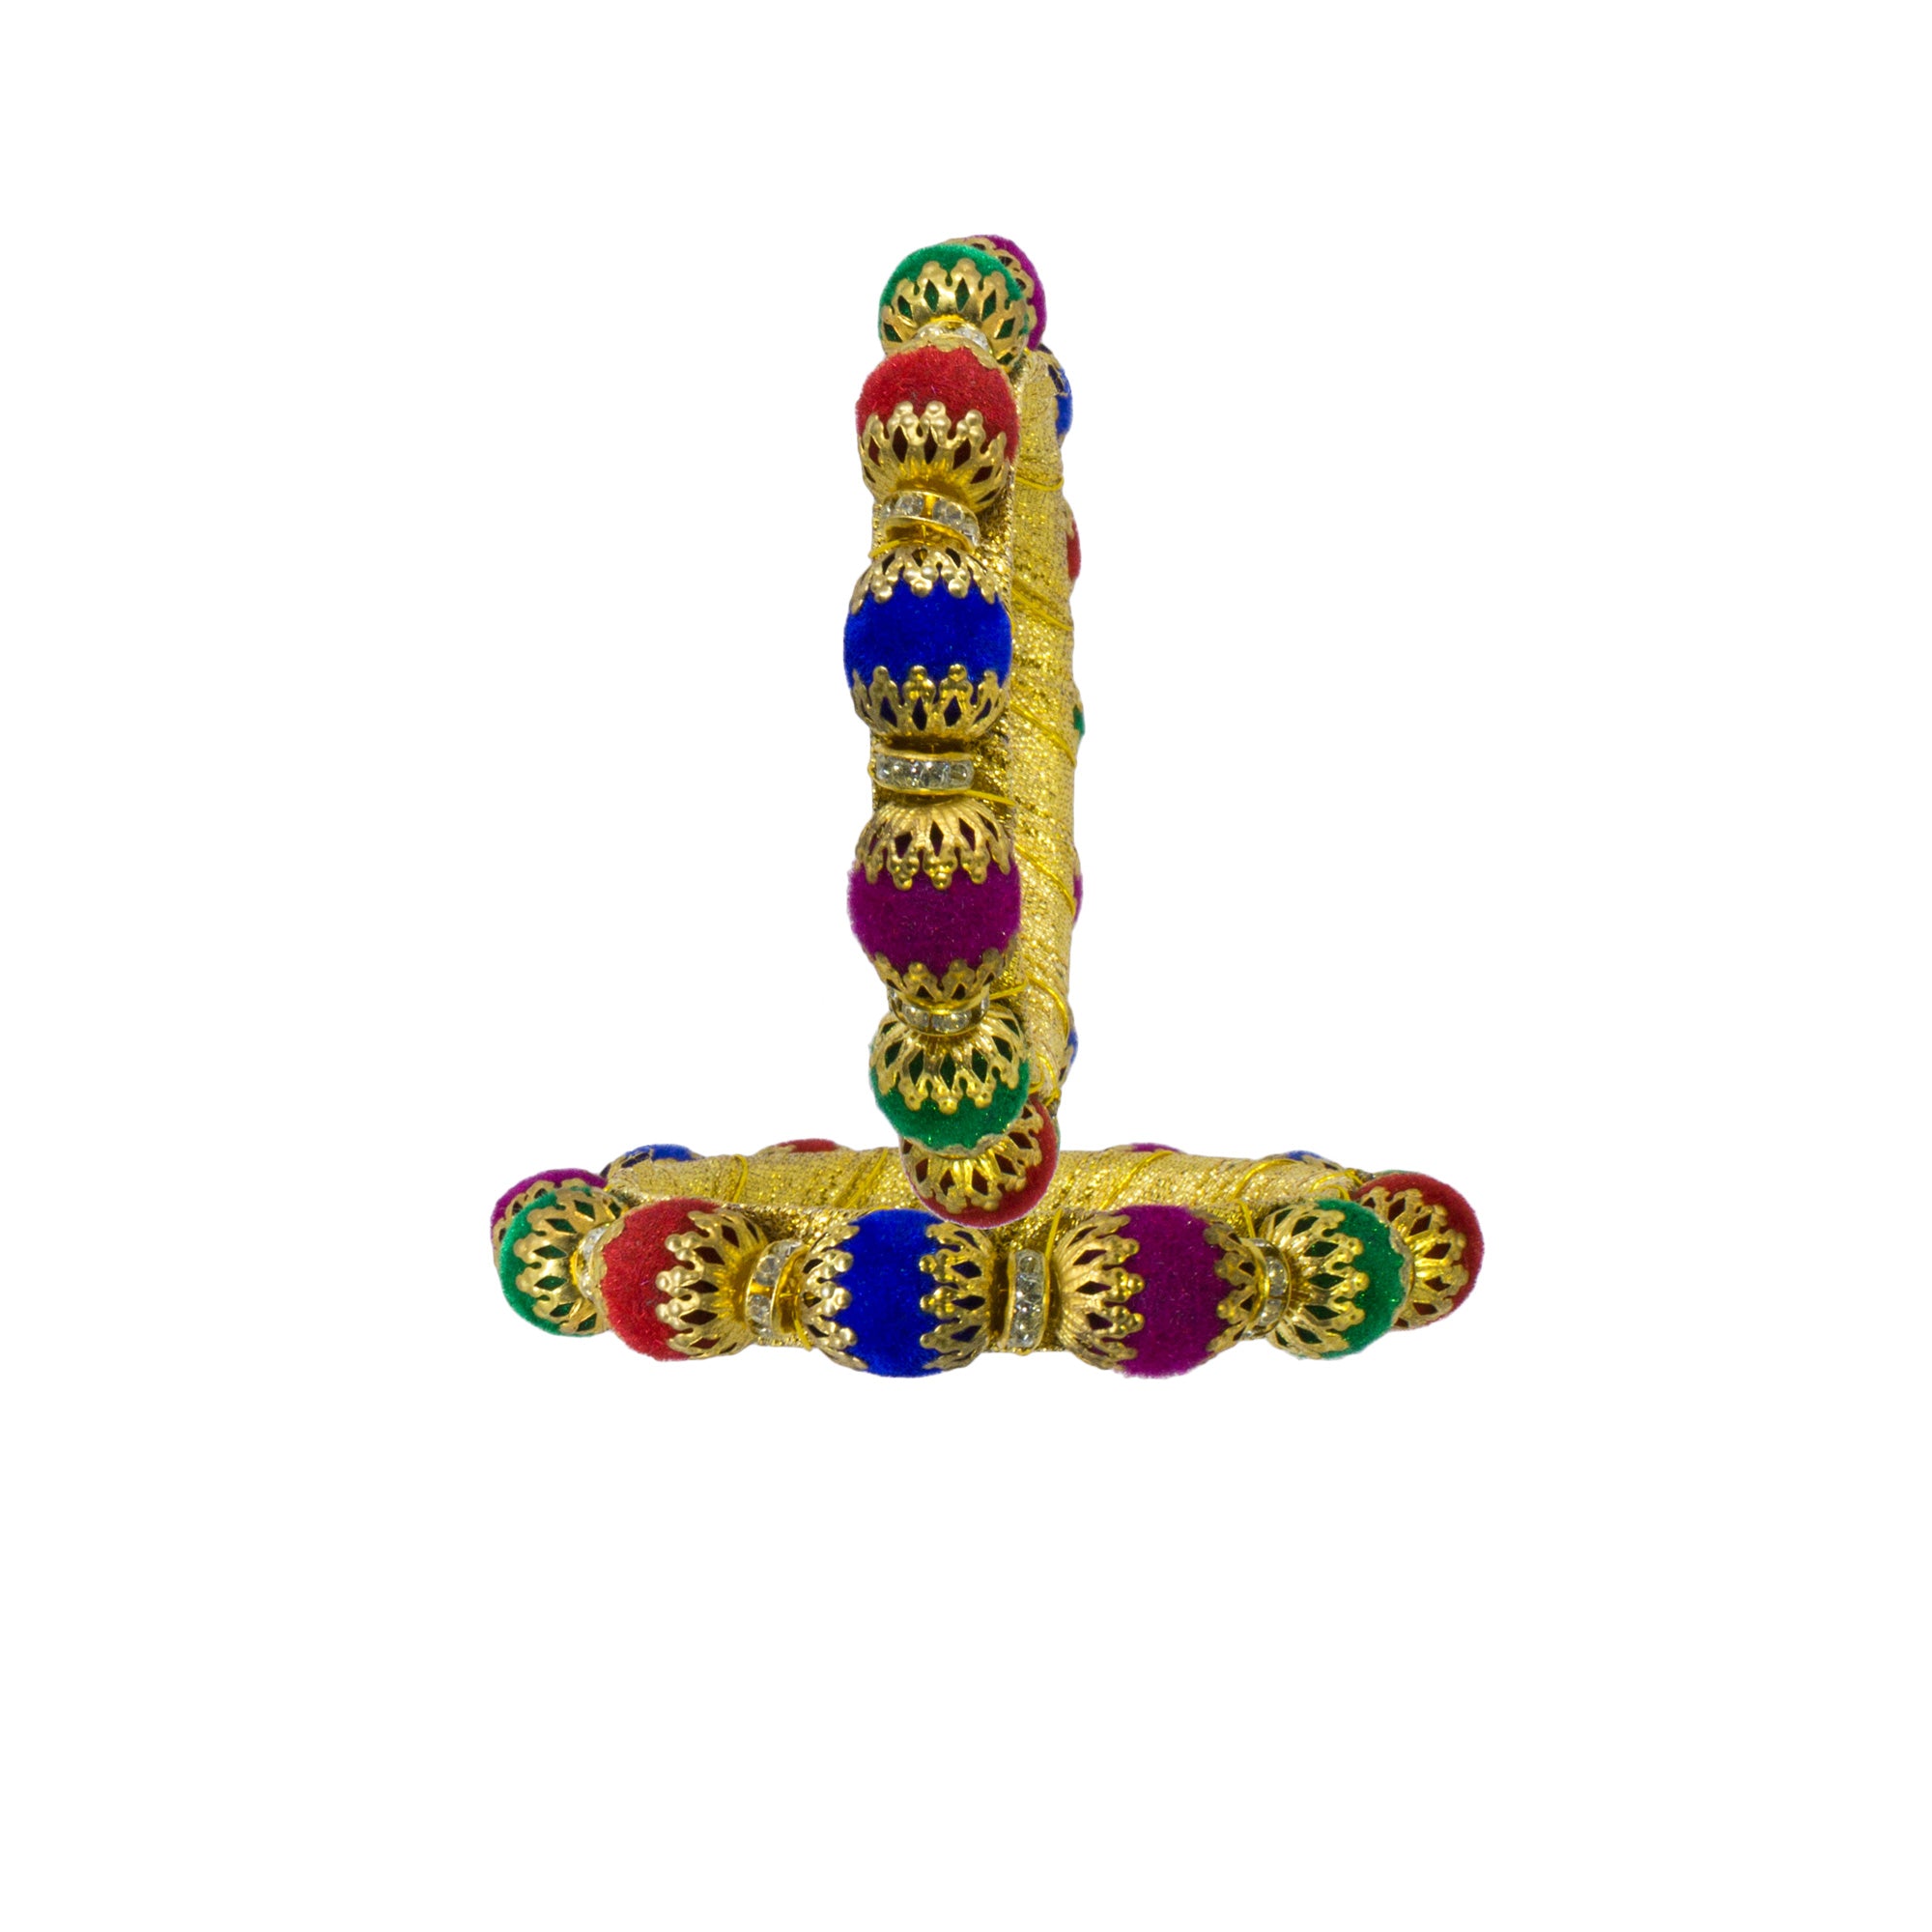 Abhinn Handicrafted Bangle Set Stringed With Multi Coloured Cotton Balls For Women